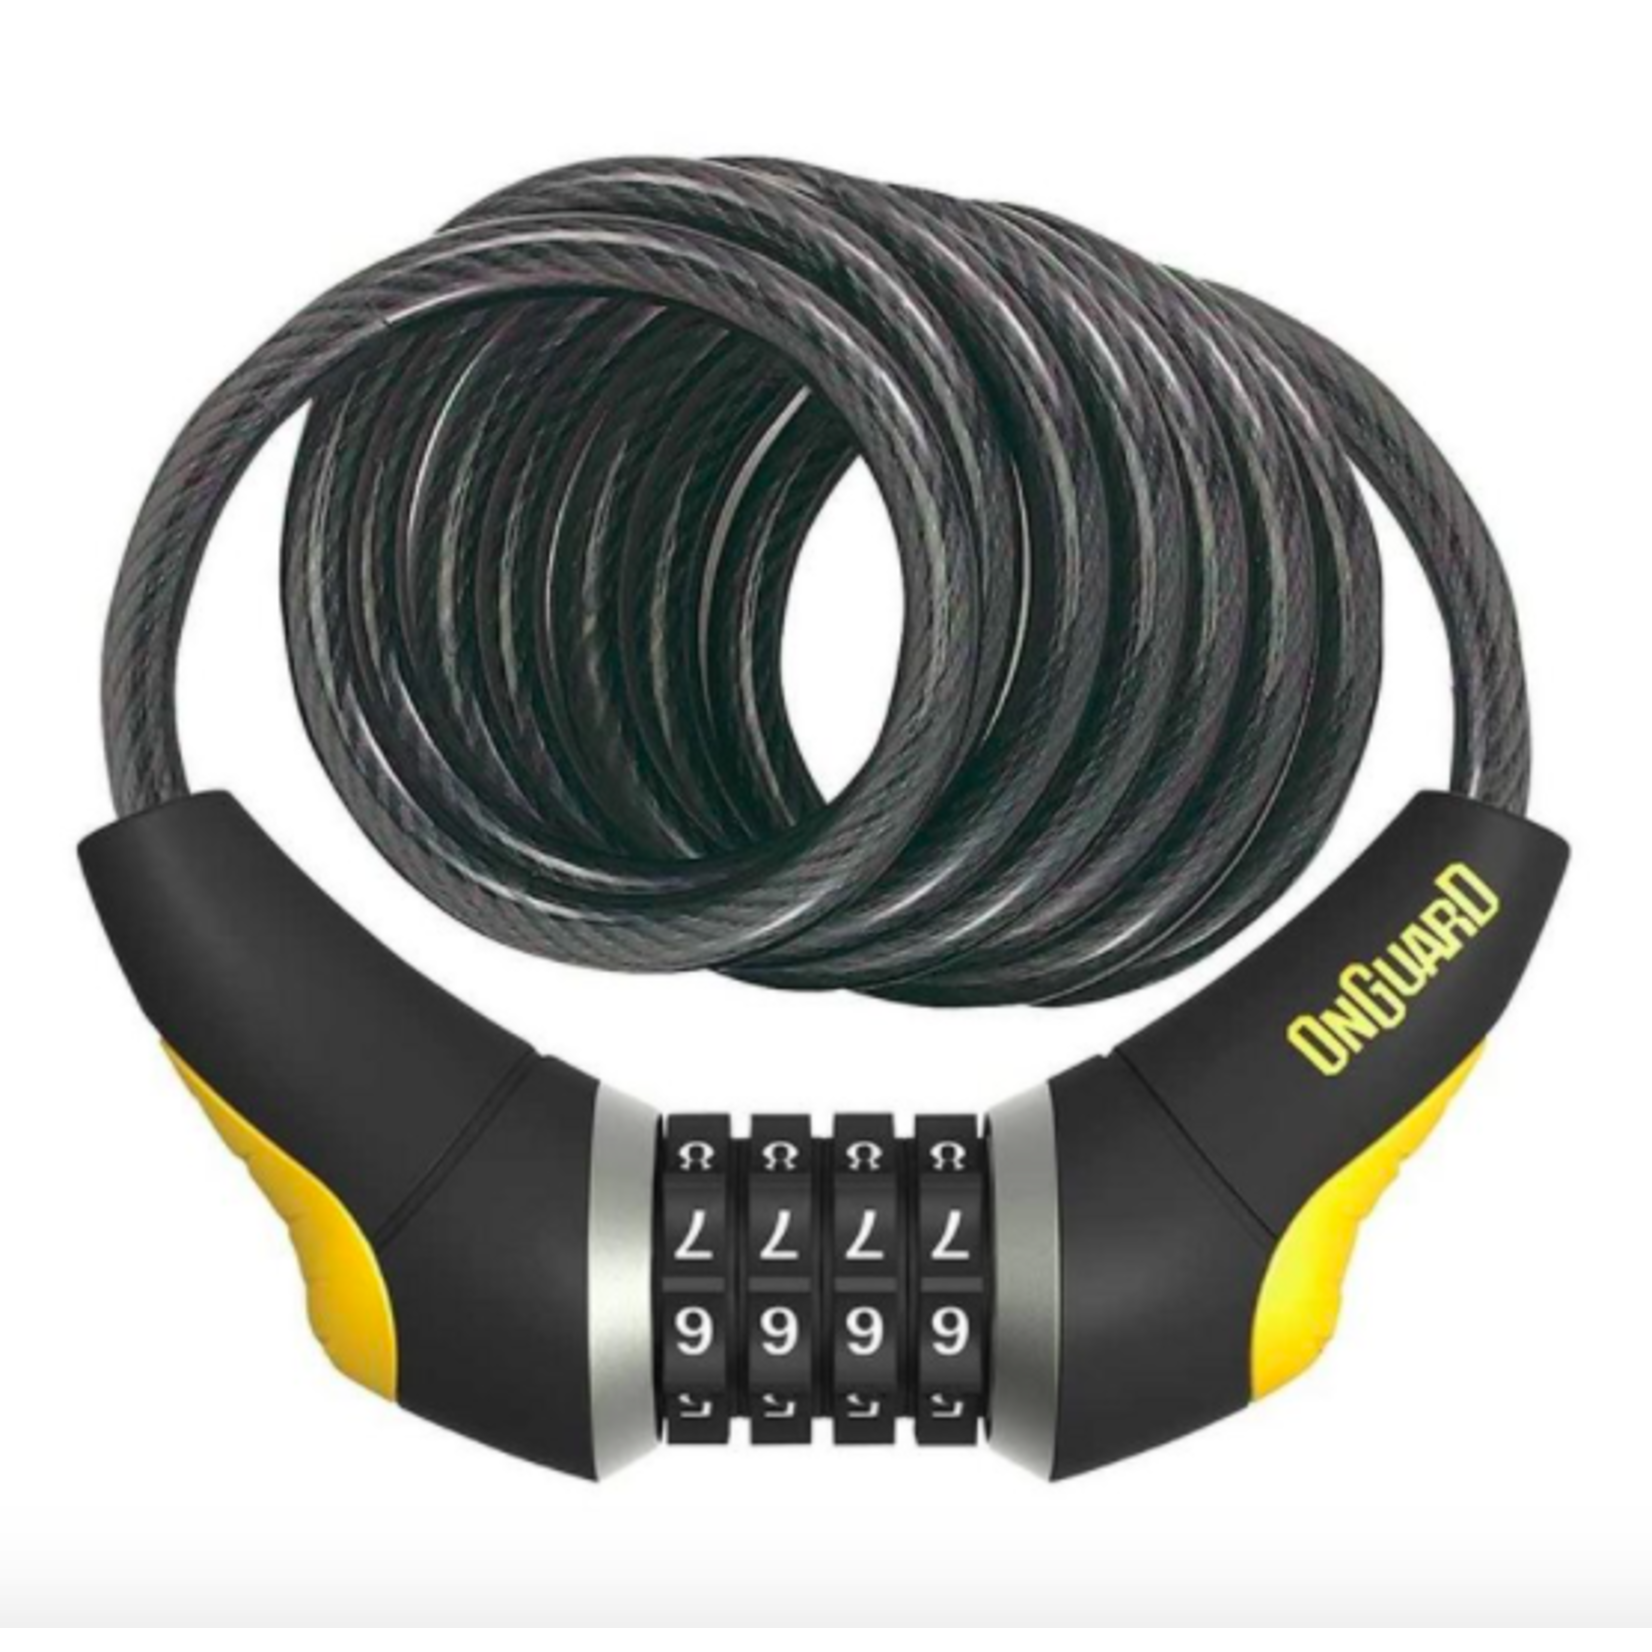 OnGuard OnGuard, Doberman 8030, Coil cable with combination lock, 15mm x 185cm